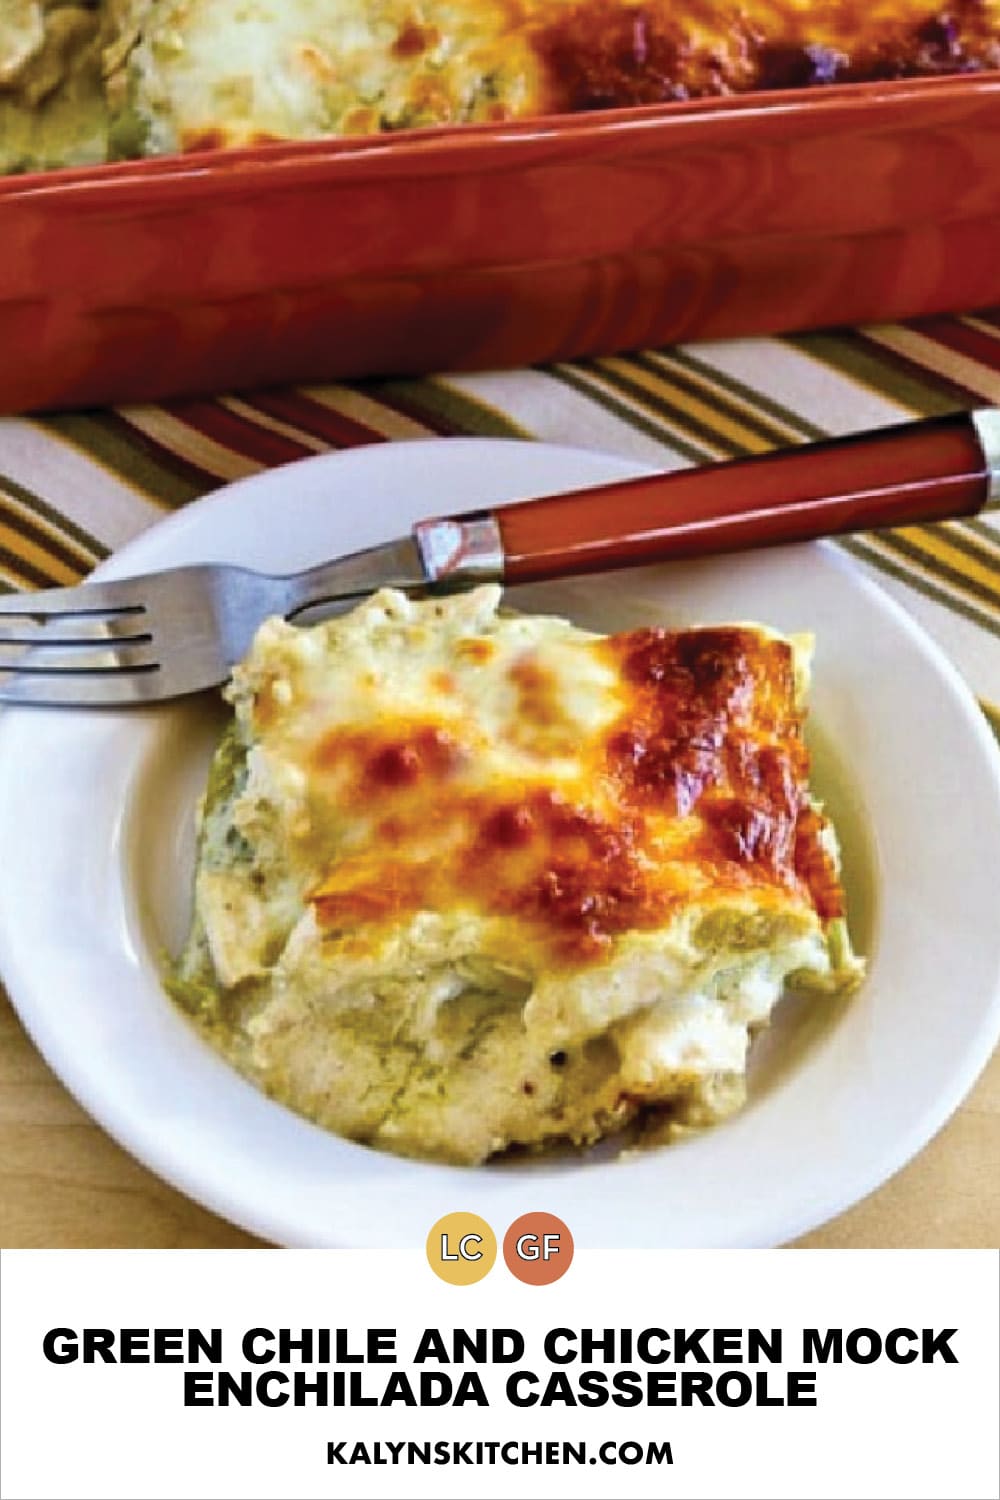 Pinterest image of Green Chile and Chicken Mock Enchilada Casserole